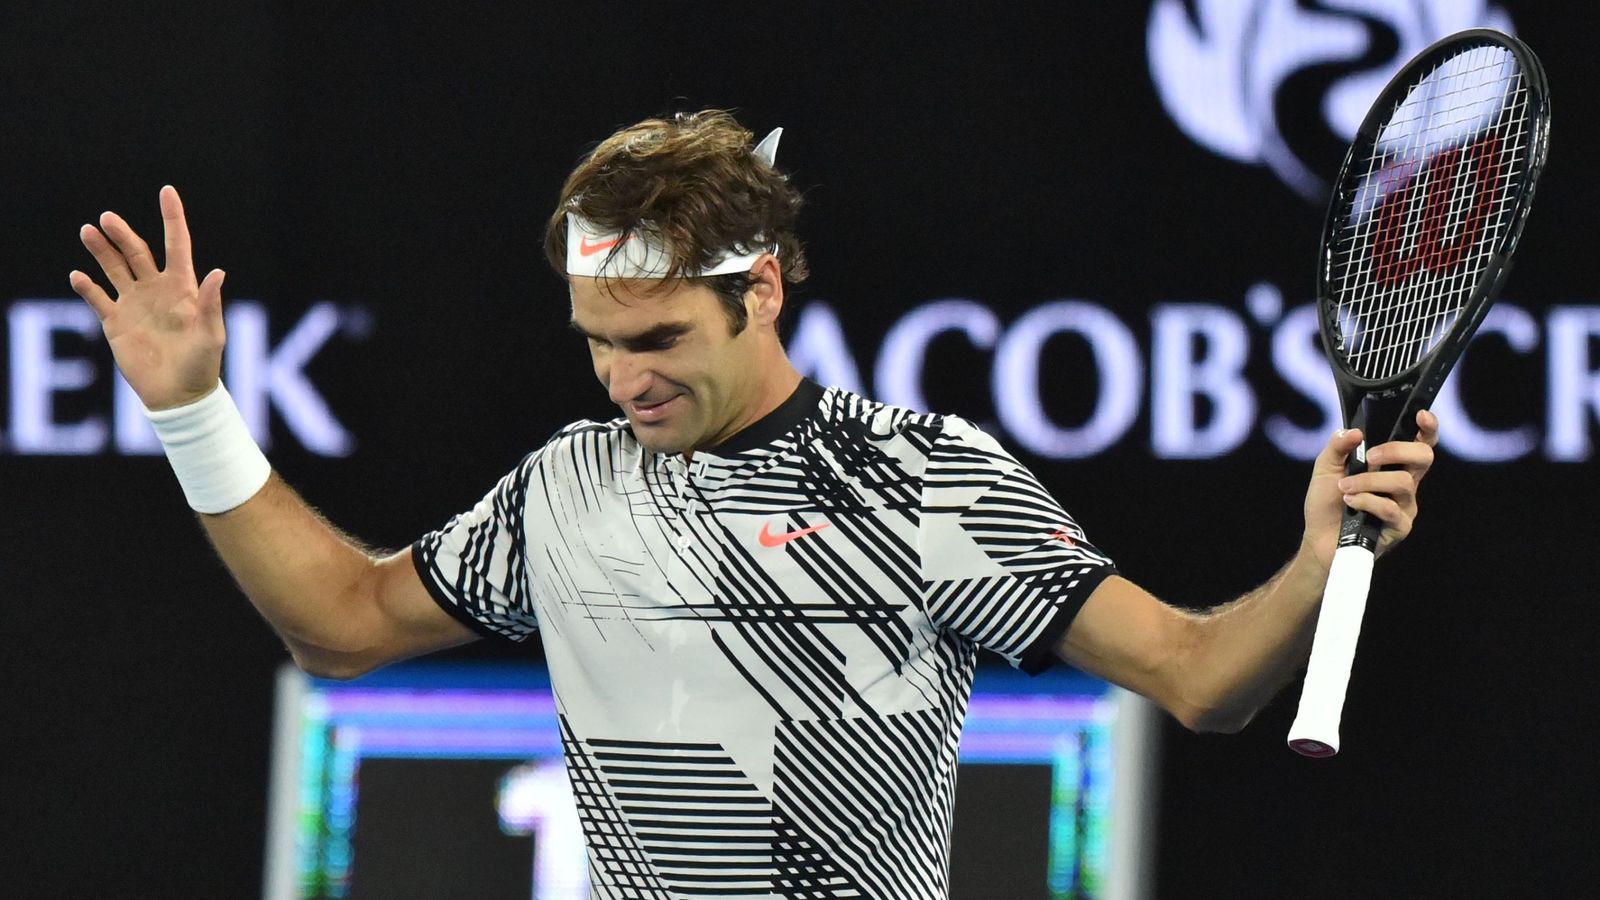 Roger Federer pleased with comeback at Australian Open as he prepares